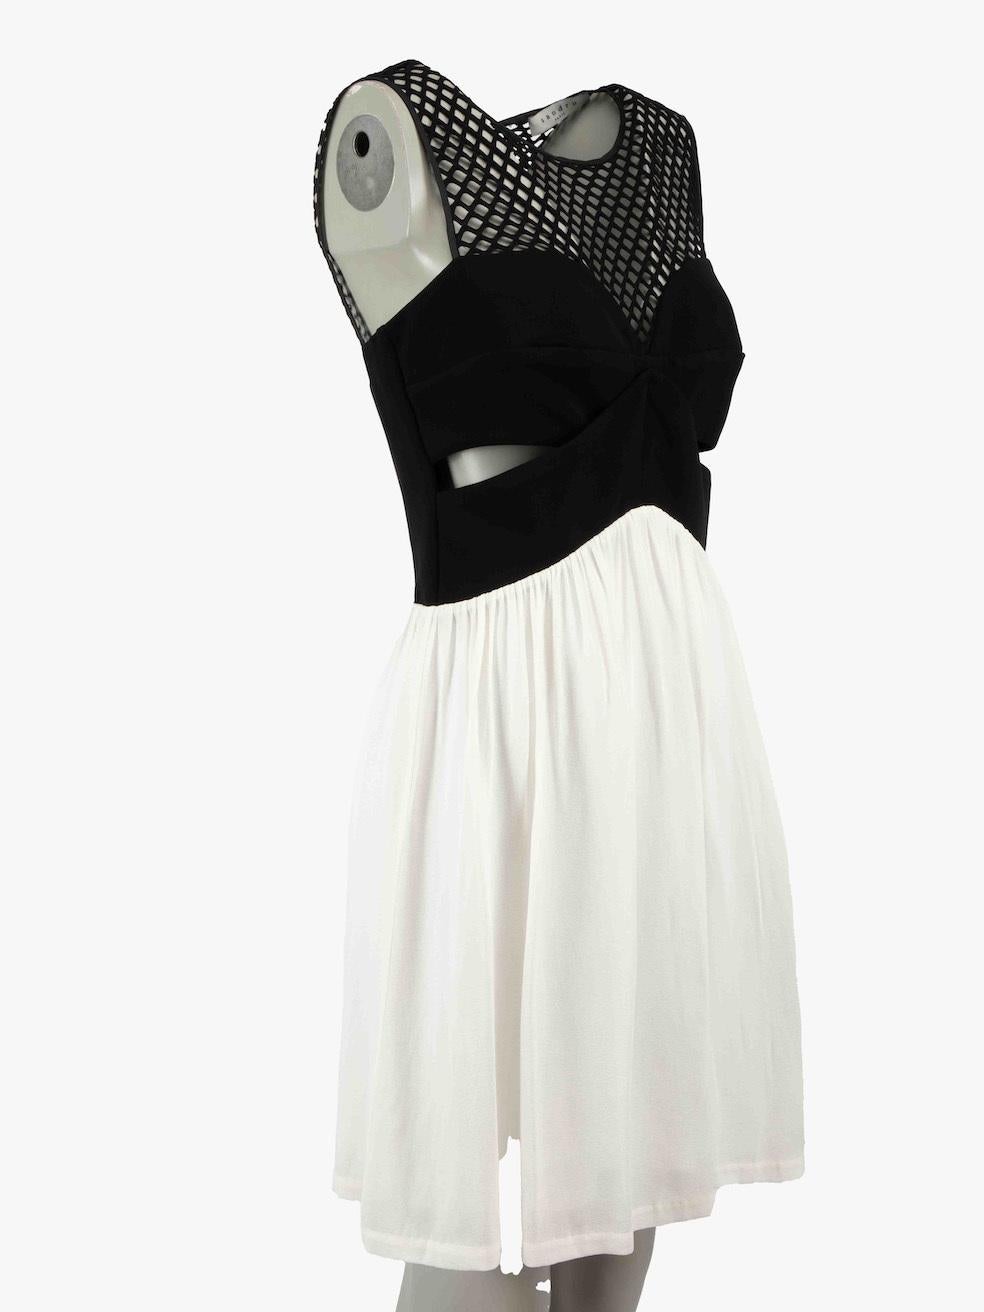 CONDITION is Very good. Hardly any visible wear to dress is evident on this used Sandro designer resale item.
 
 Details
 Black and white
 Viscose
 Dress
 Mini
 Sleeveless
 Round neck
 Cut out details
 Gathered skirt
 Back zip fastening
 Made in